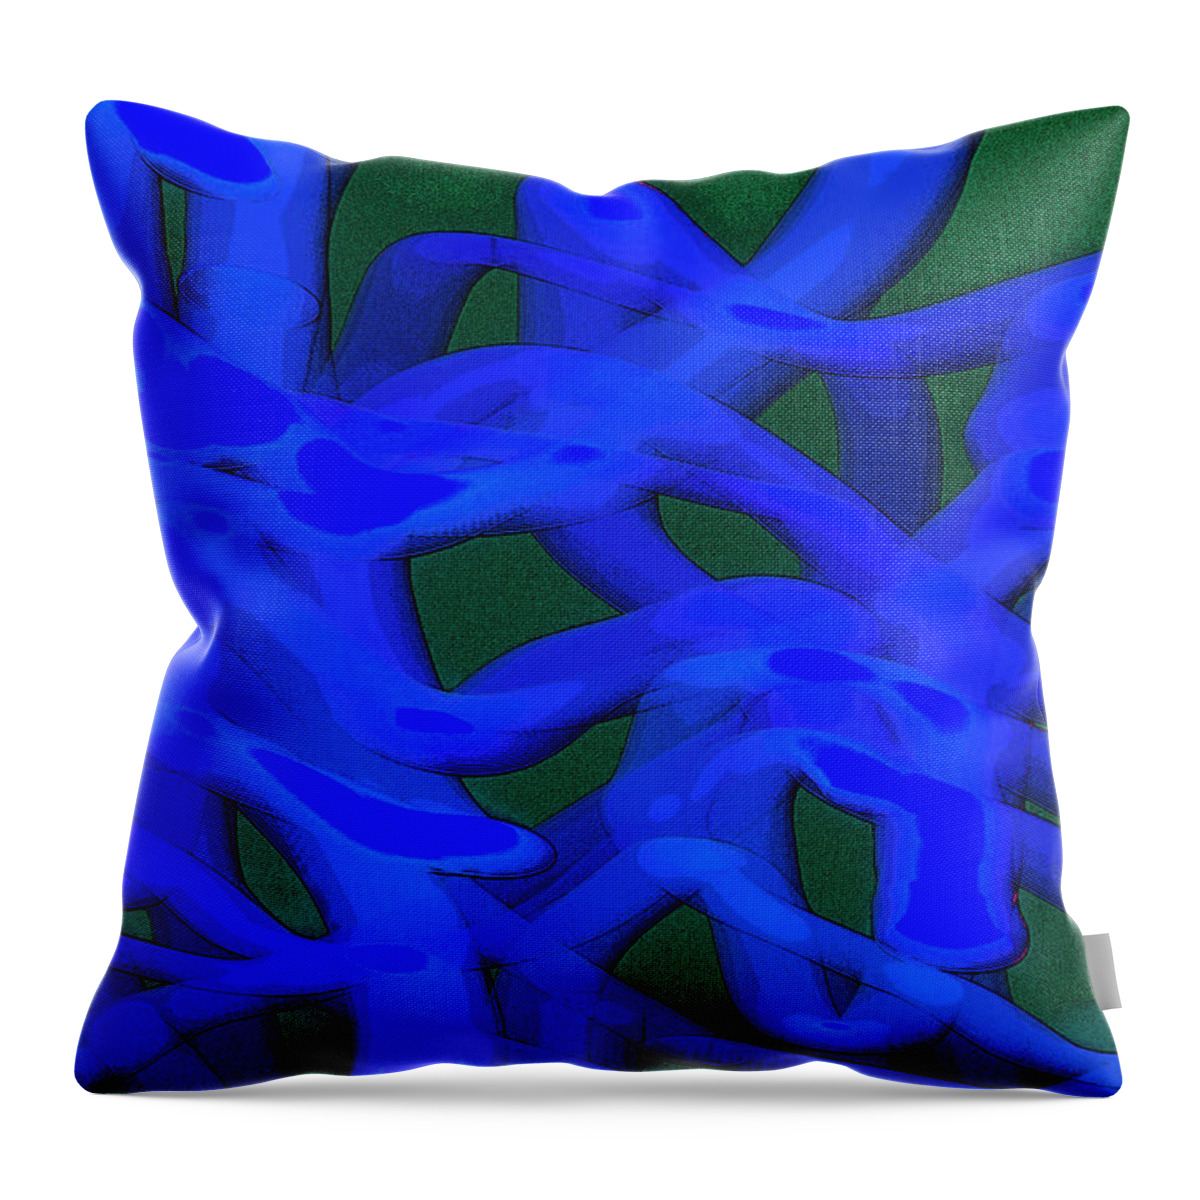 Abstract Throw Pillow featuring the photograph Moral Fibers by Marnie Patchett